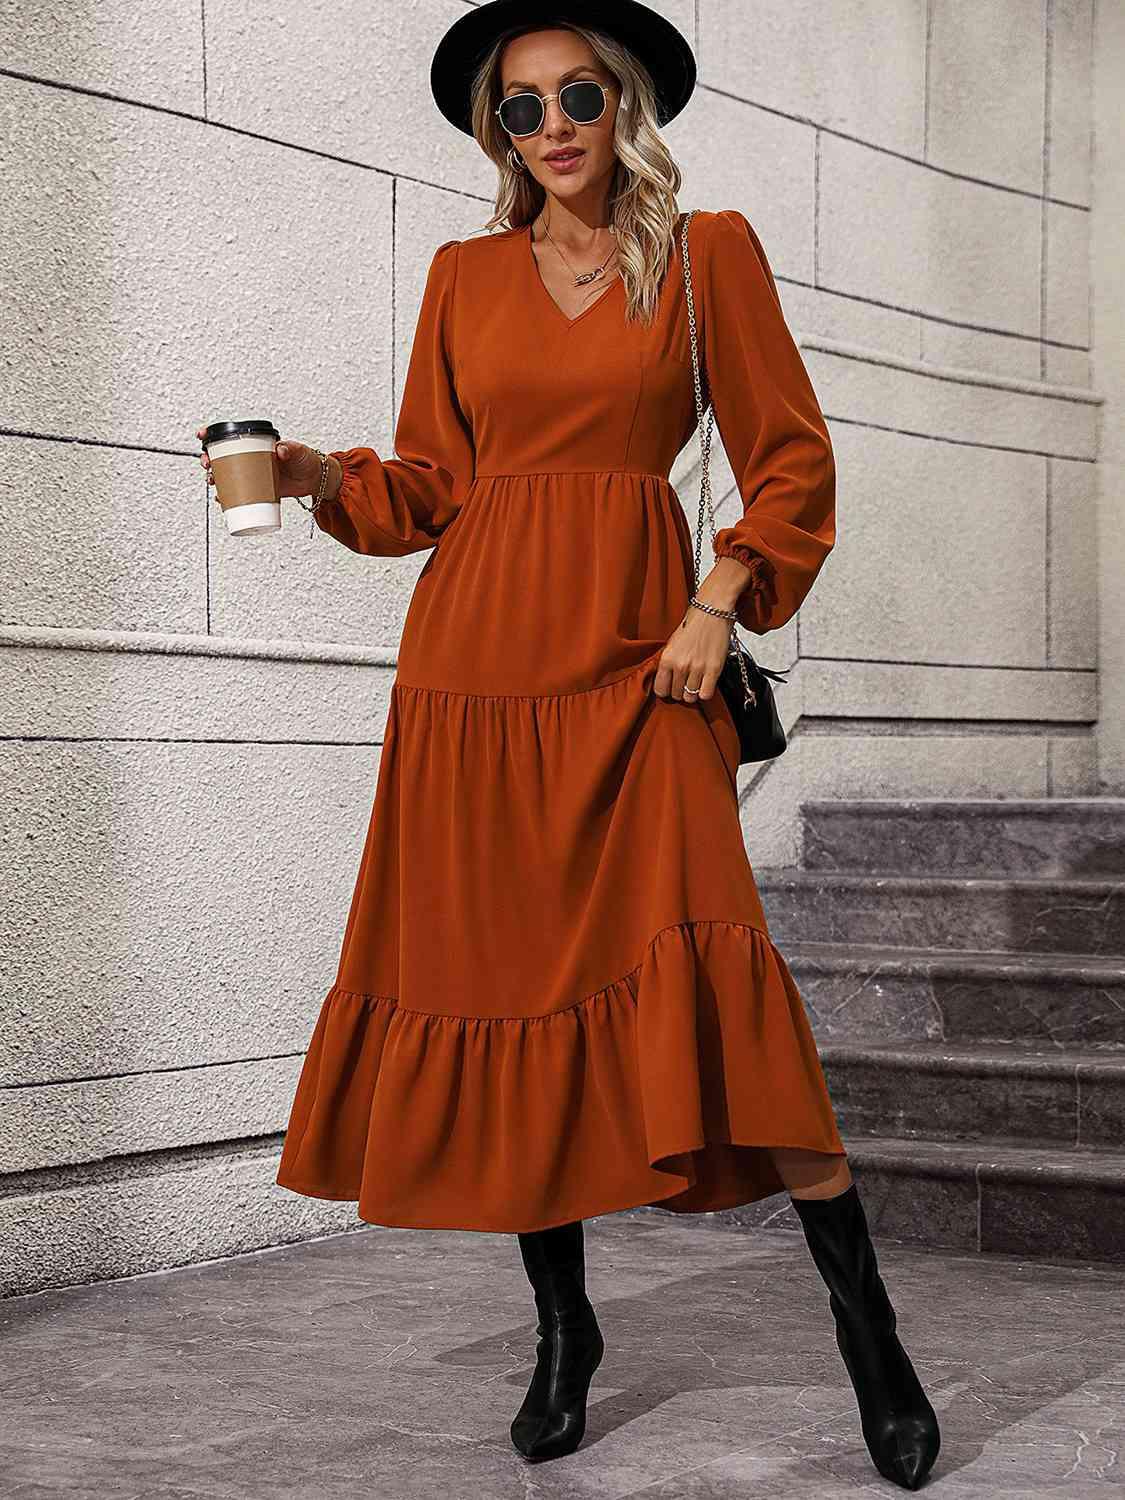 a woman in an orange dress and hat holding a cup of coffee